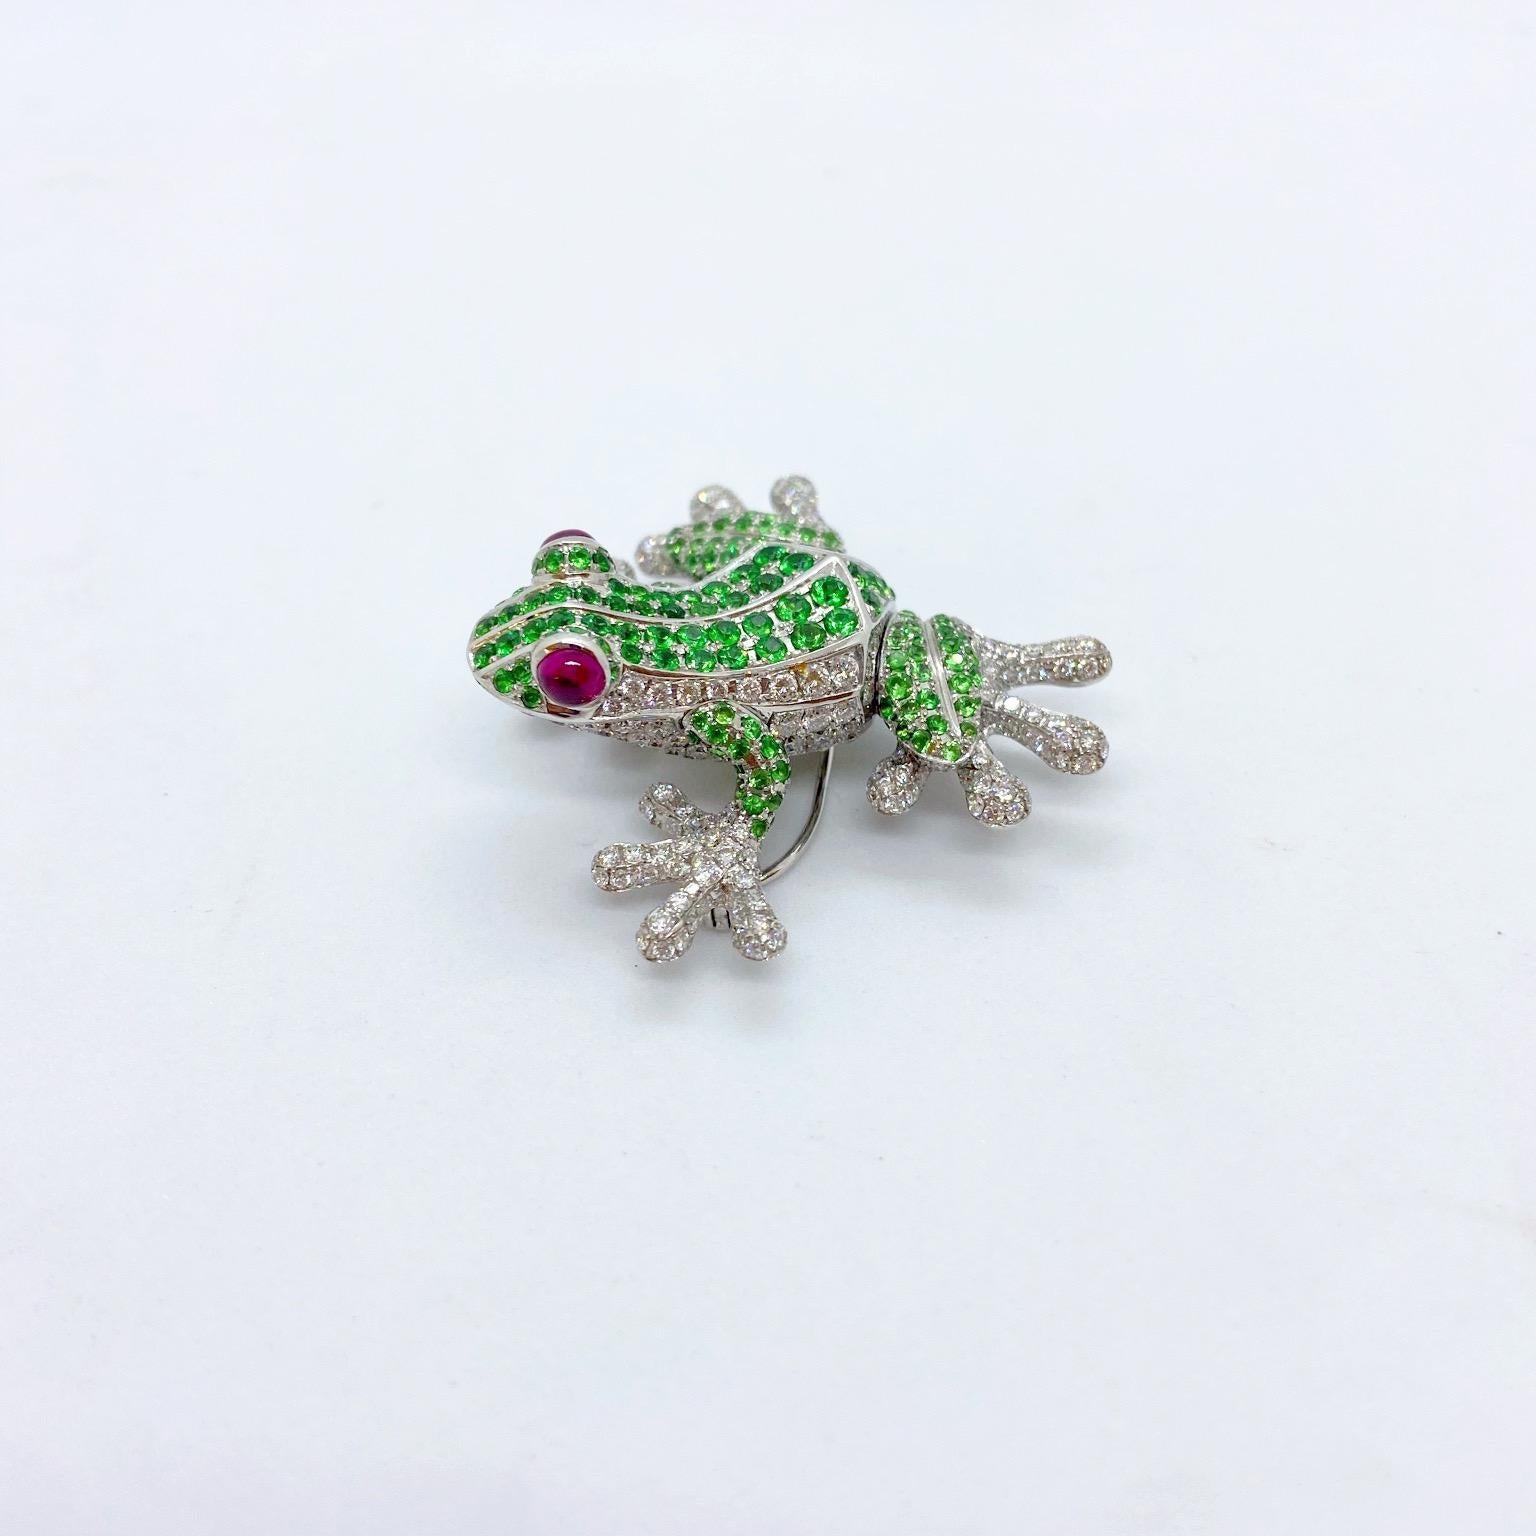 This fun frog brooch is set with 4.40 carats of diamonds , 4.95 carats of tsavorites and has .80 carats of cabochon rubies as eyes. Measurements are 1.75